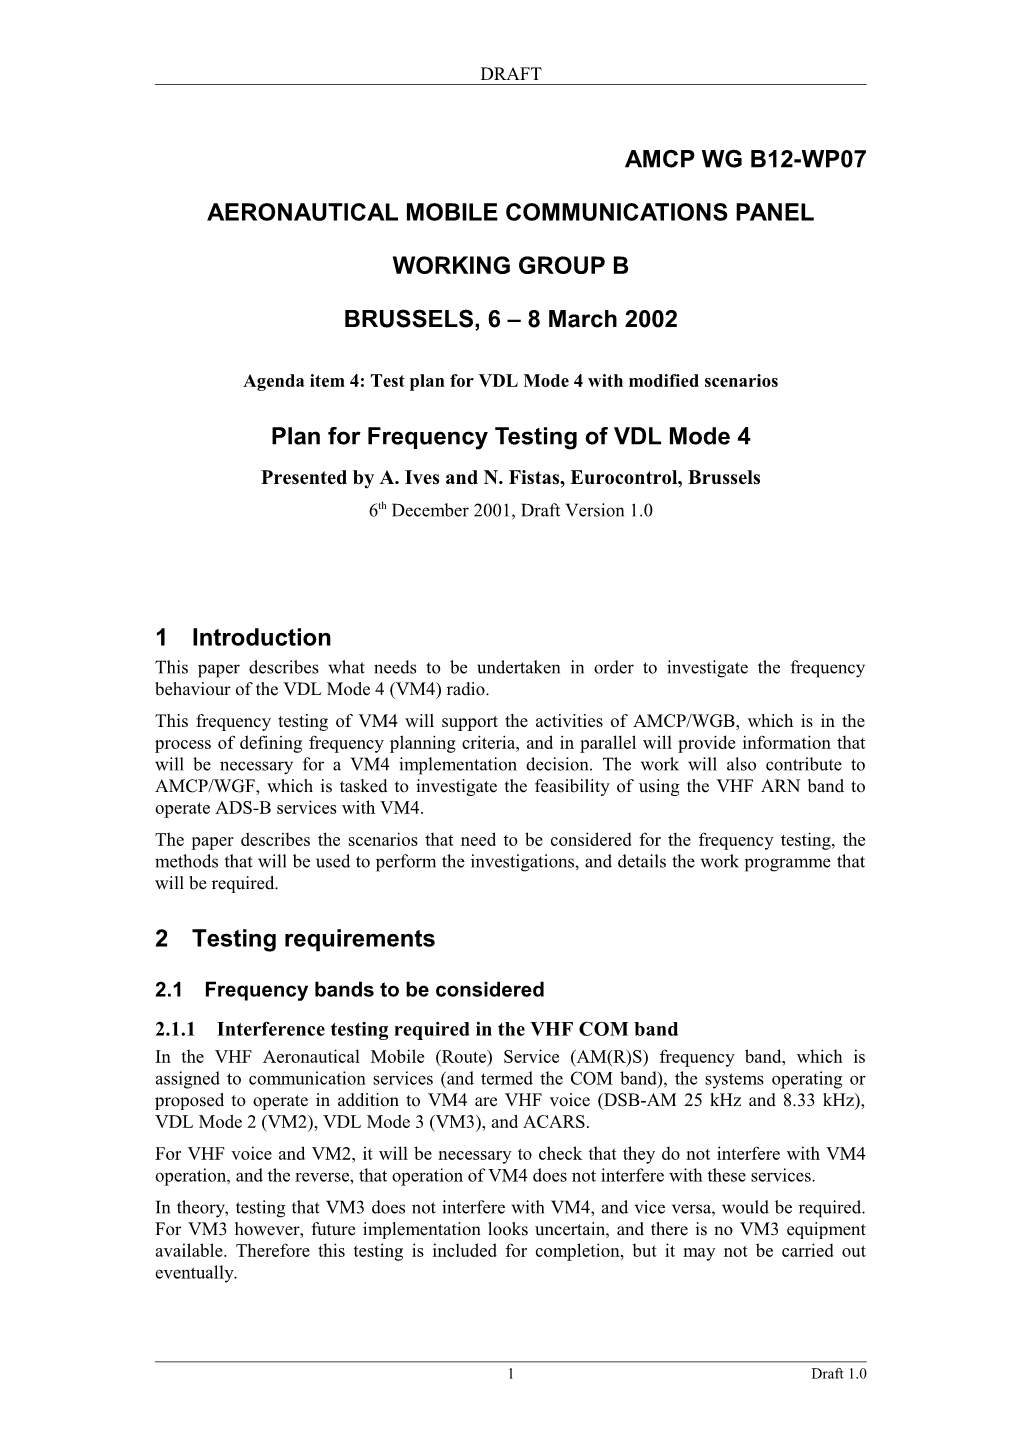 Plan for Frequency Testing of VDL Mode 4